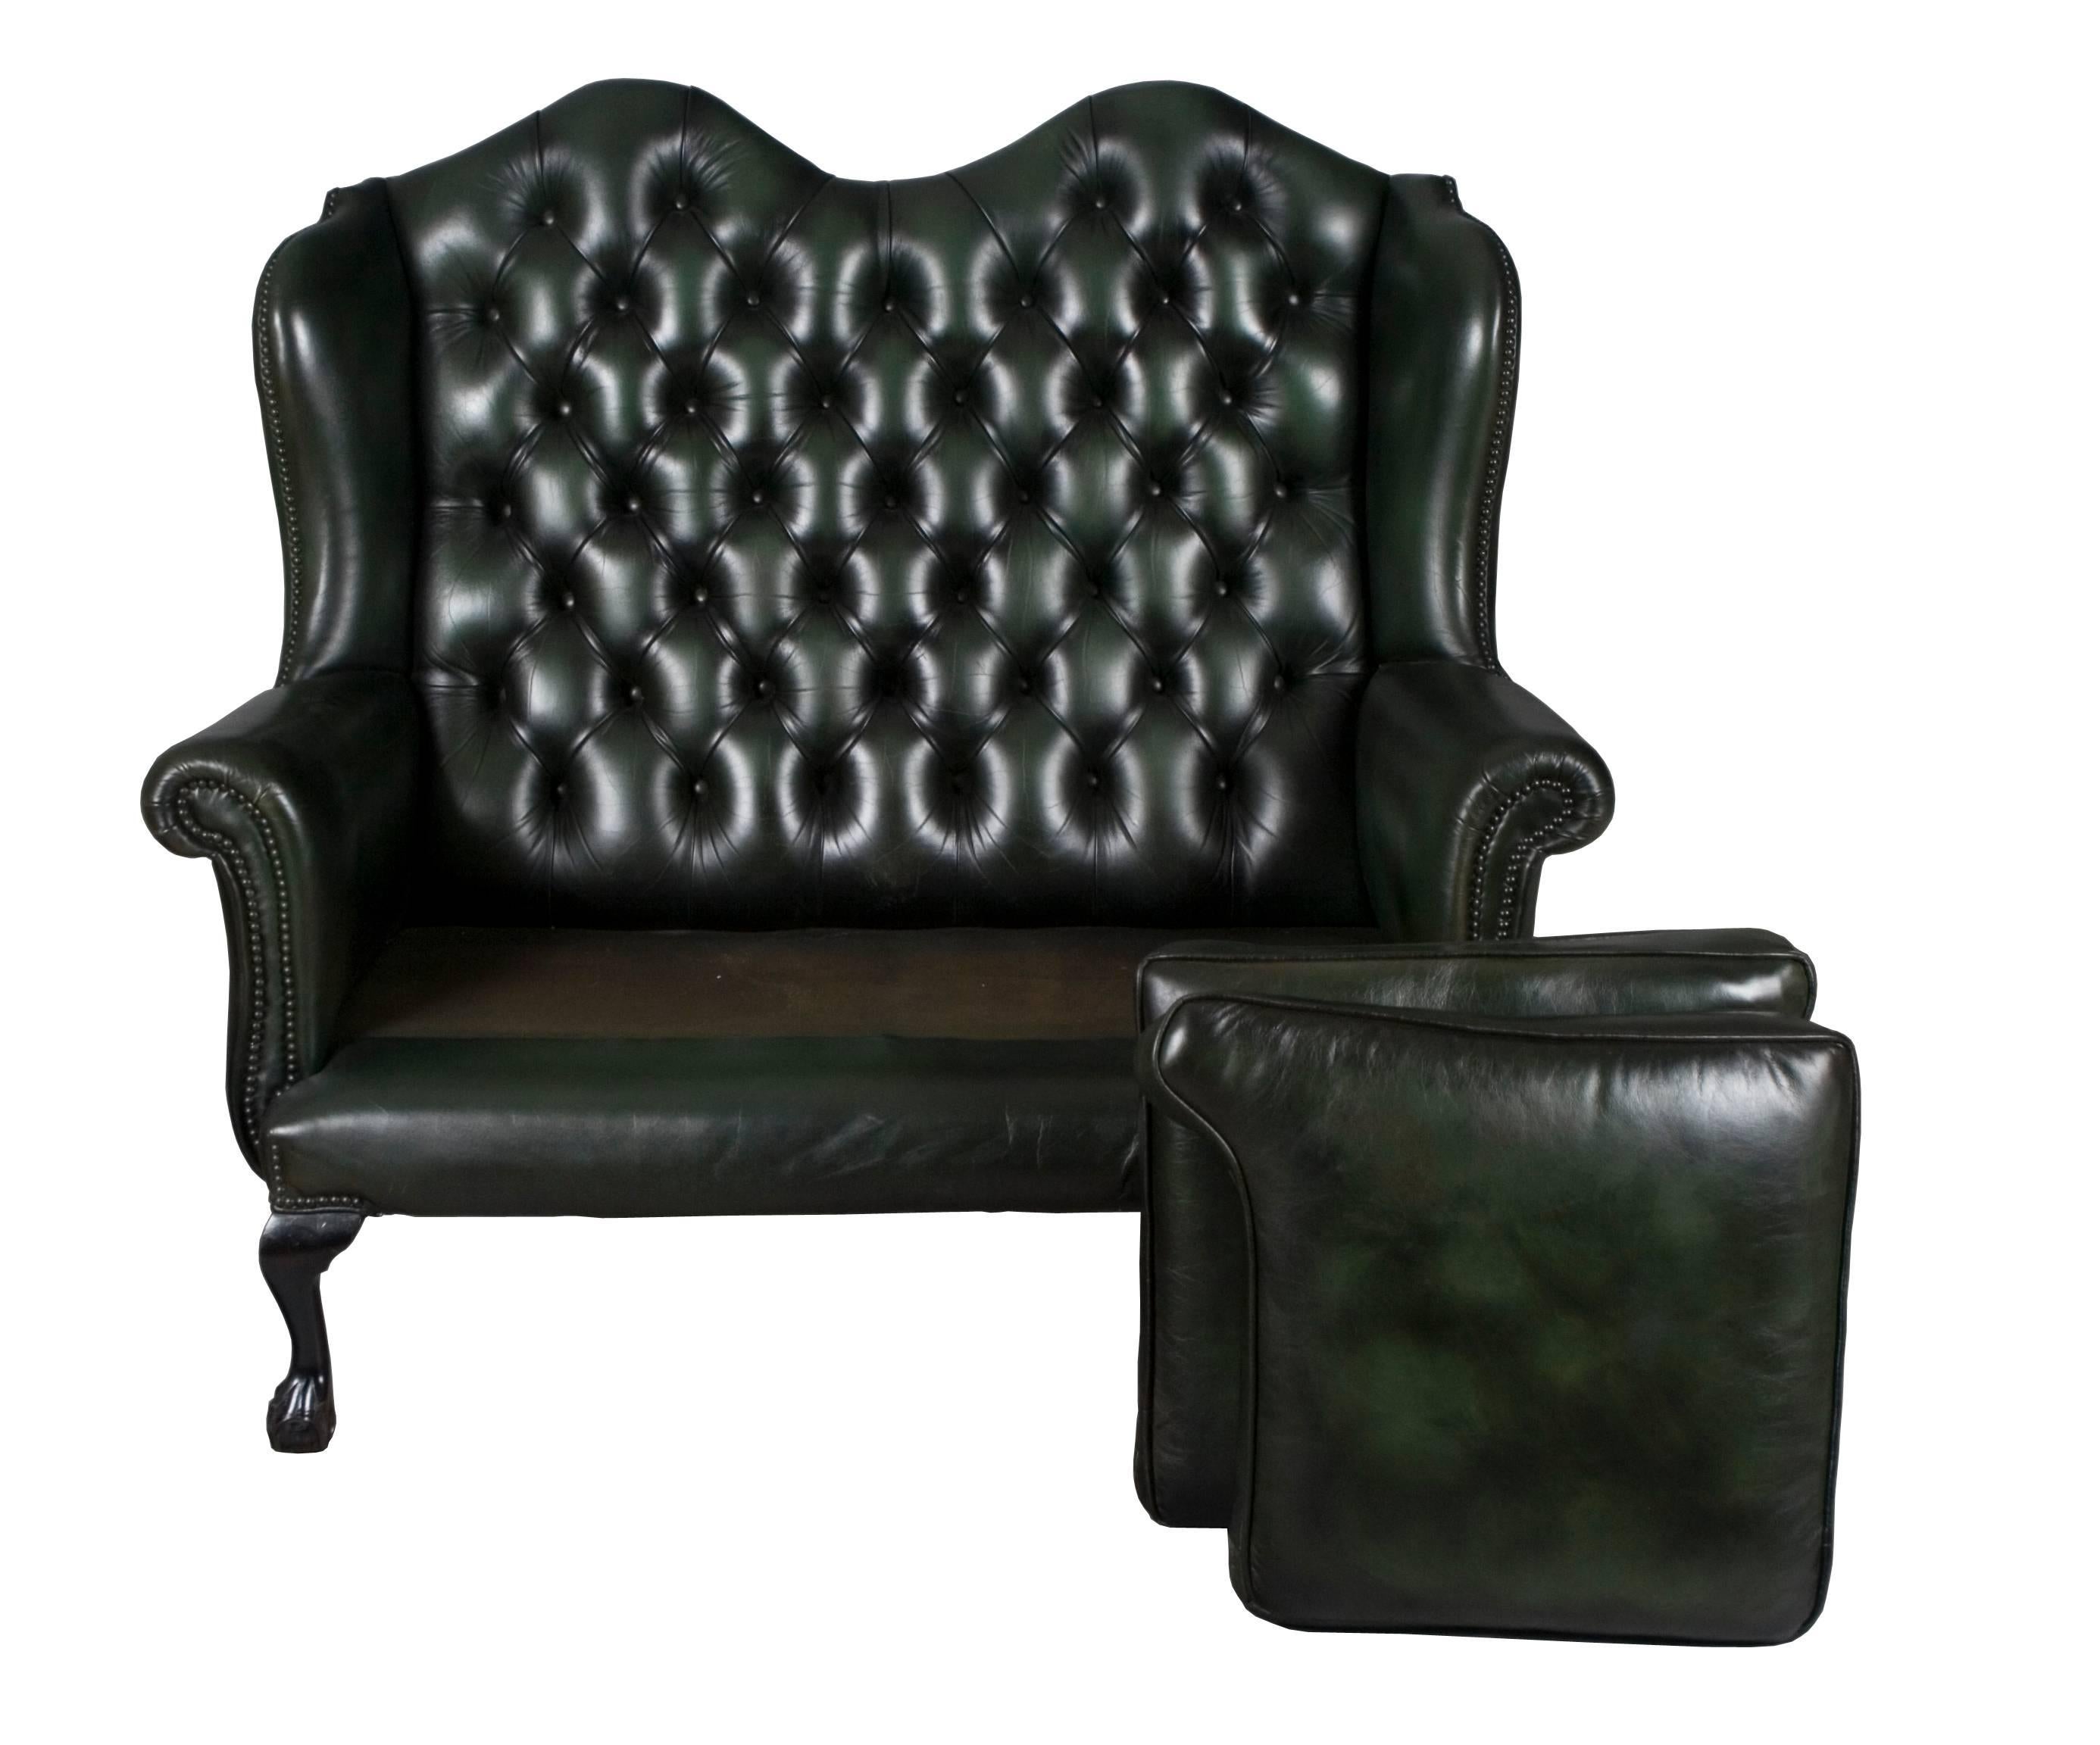 Hailing from England, this tall back leather love seat is stunning and full of charm. Crafted back around 1980 out of a top grade green leather, it remains in very good condition today. Charming leather, a tufted wing back, and Queen Anne style feet